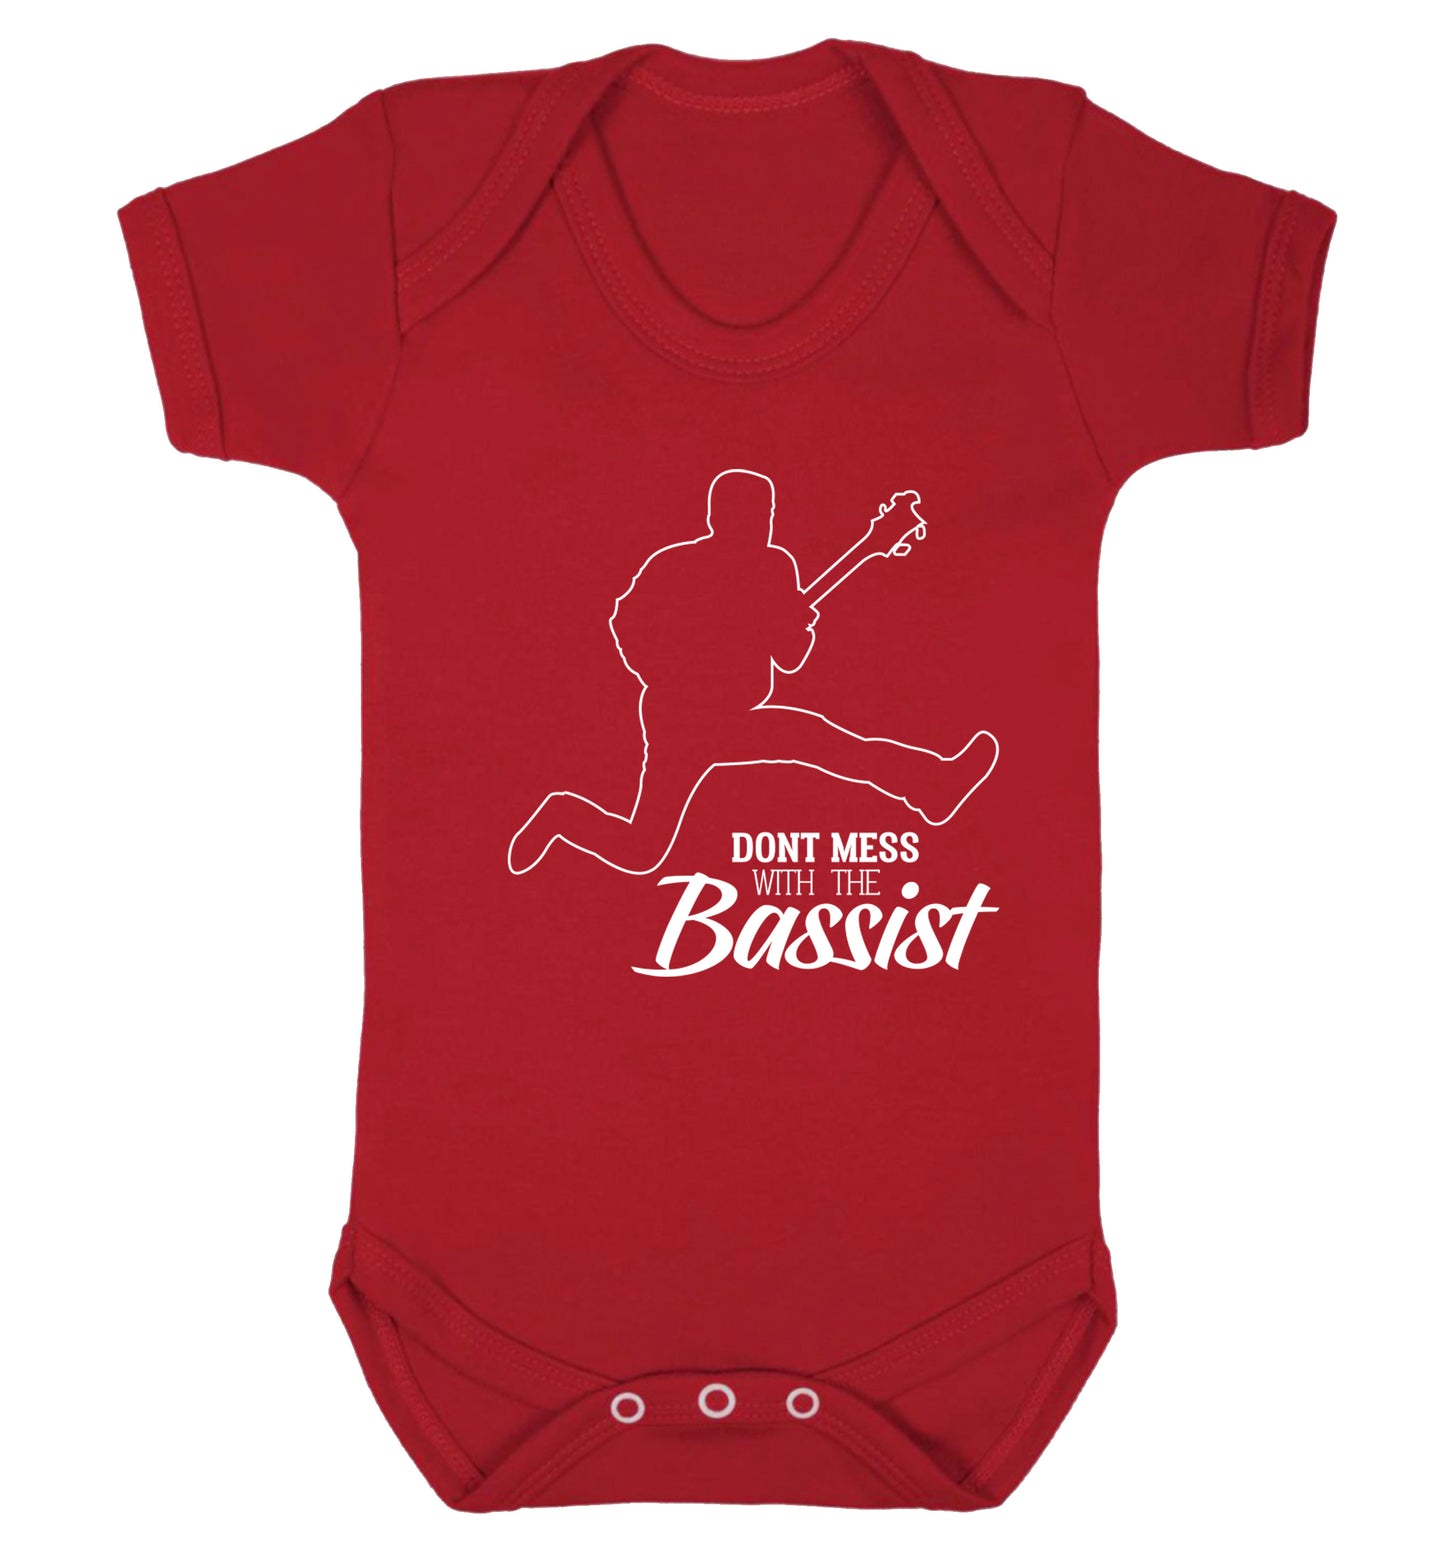 Dont mess with the bassist Baby Vest red 18-24 months